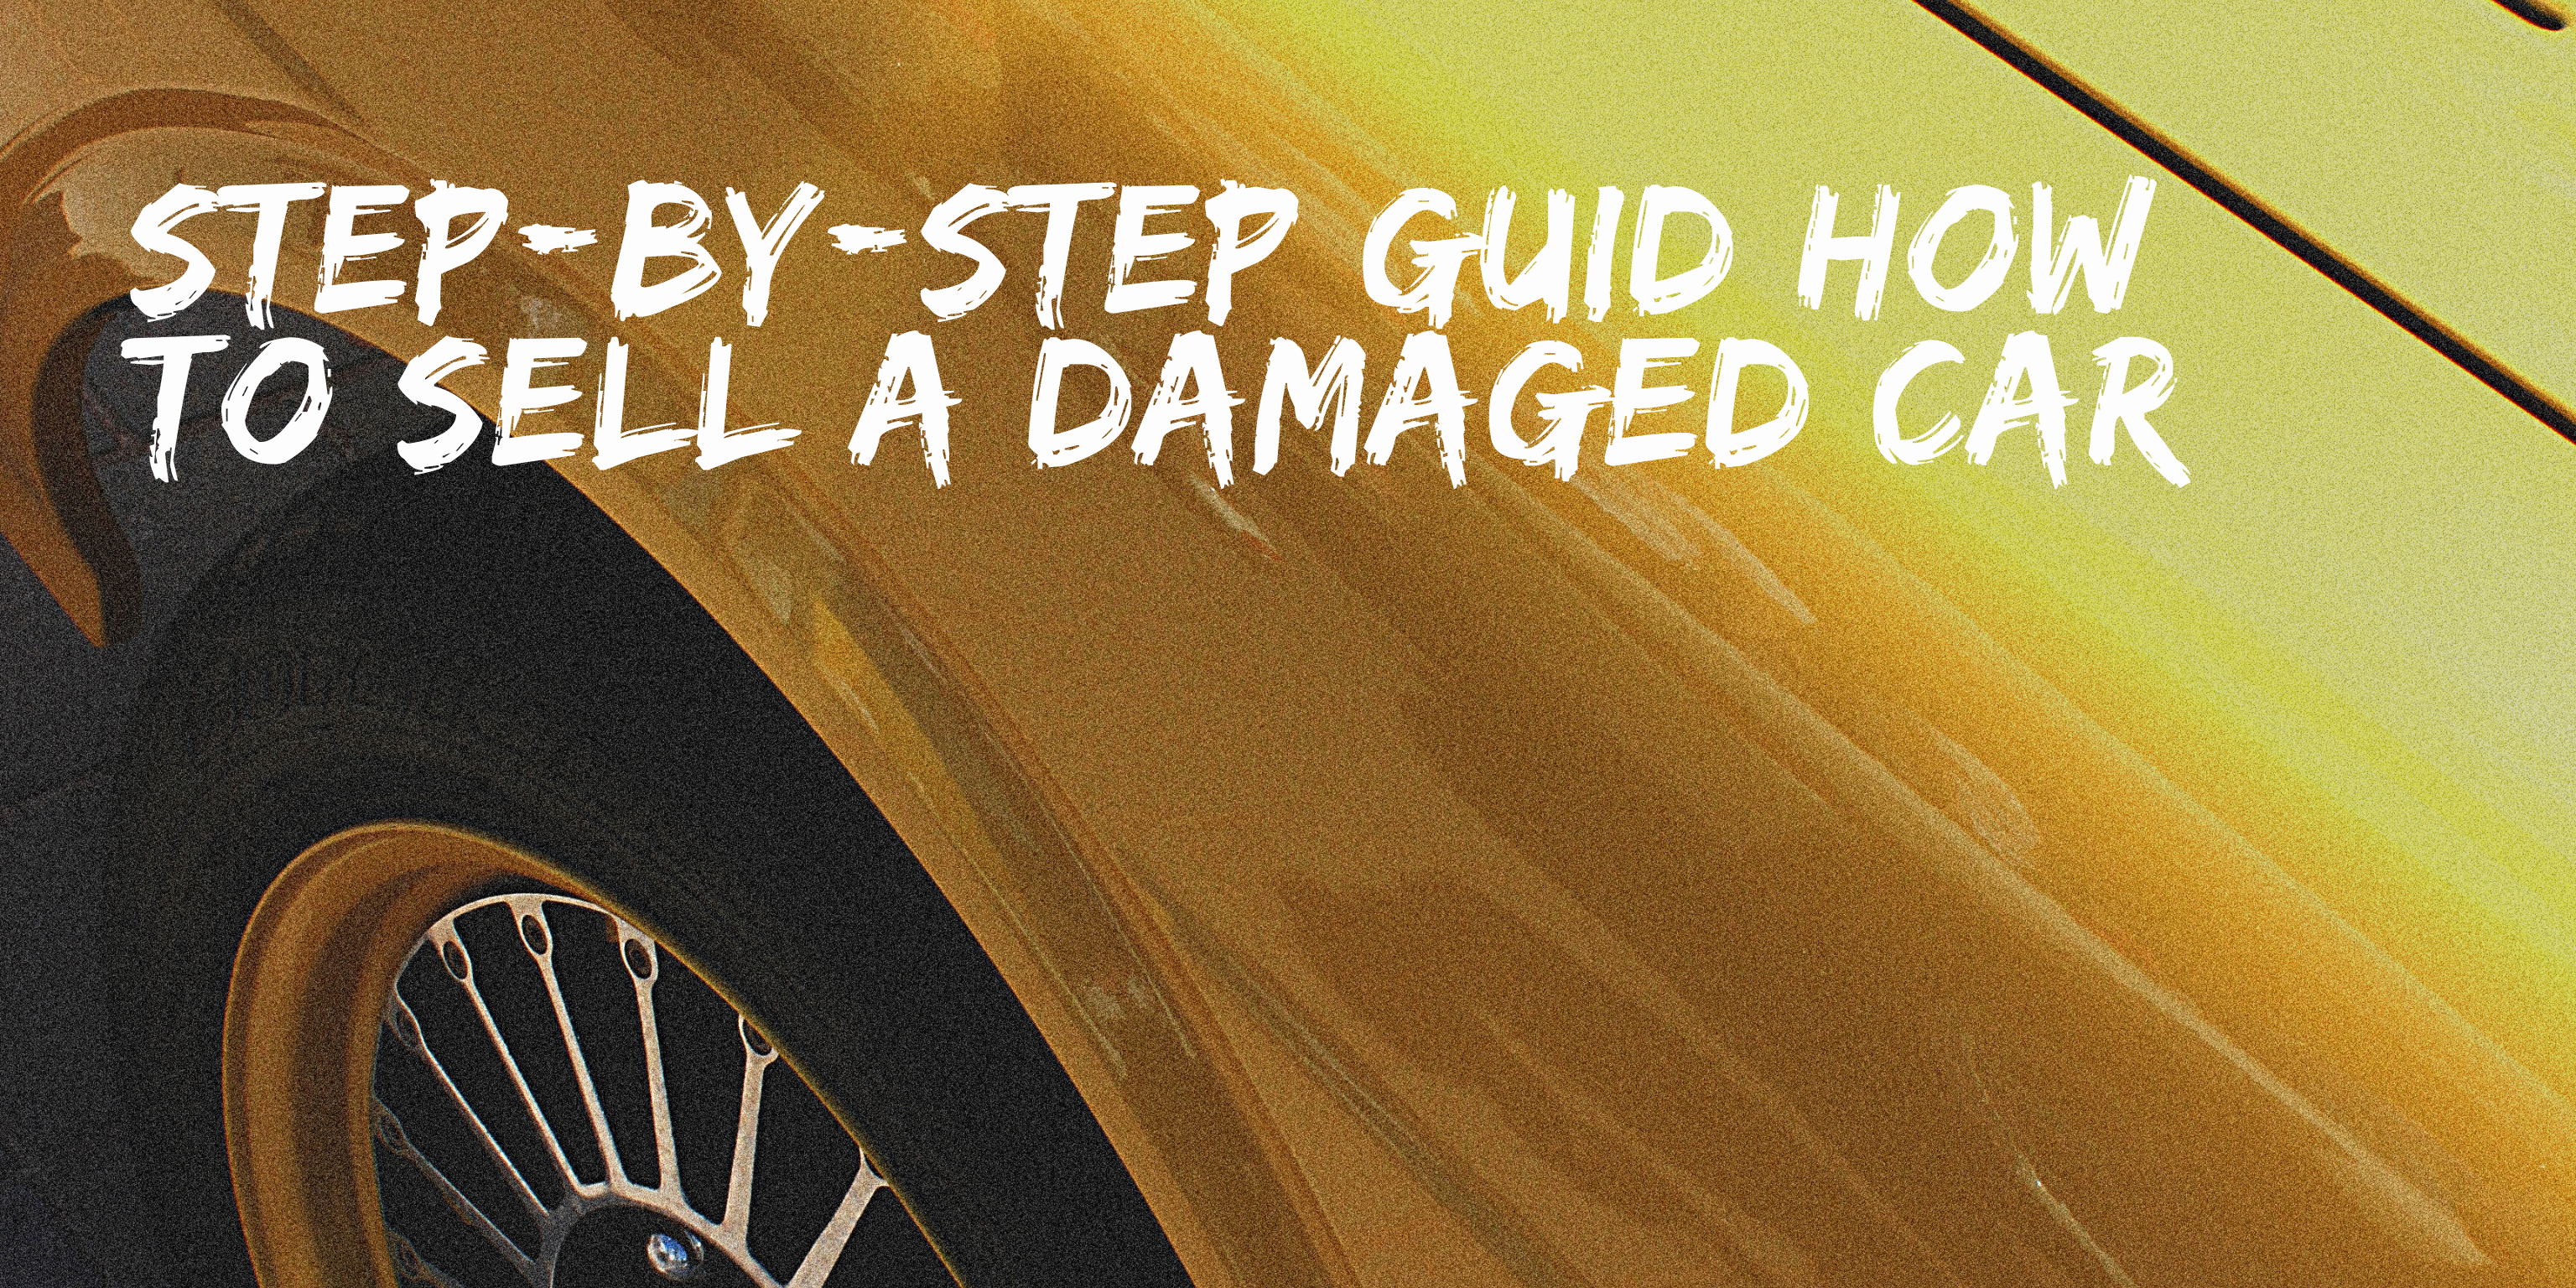 Step-By-Step Guide How To Sell A Damaged Car